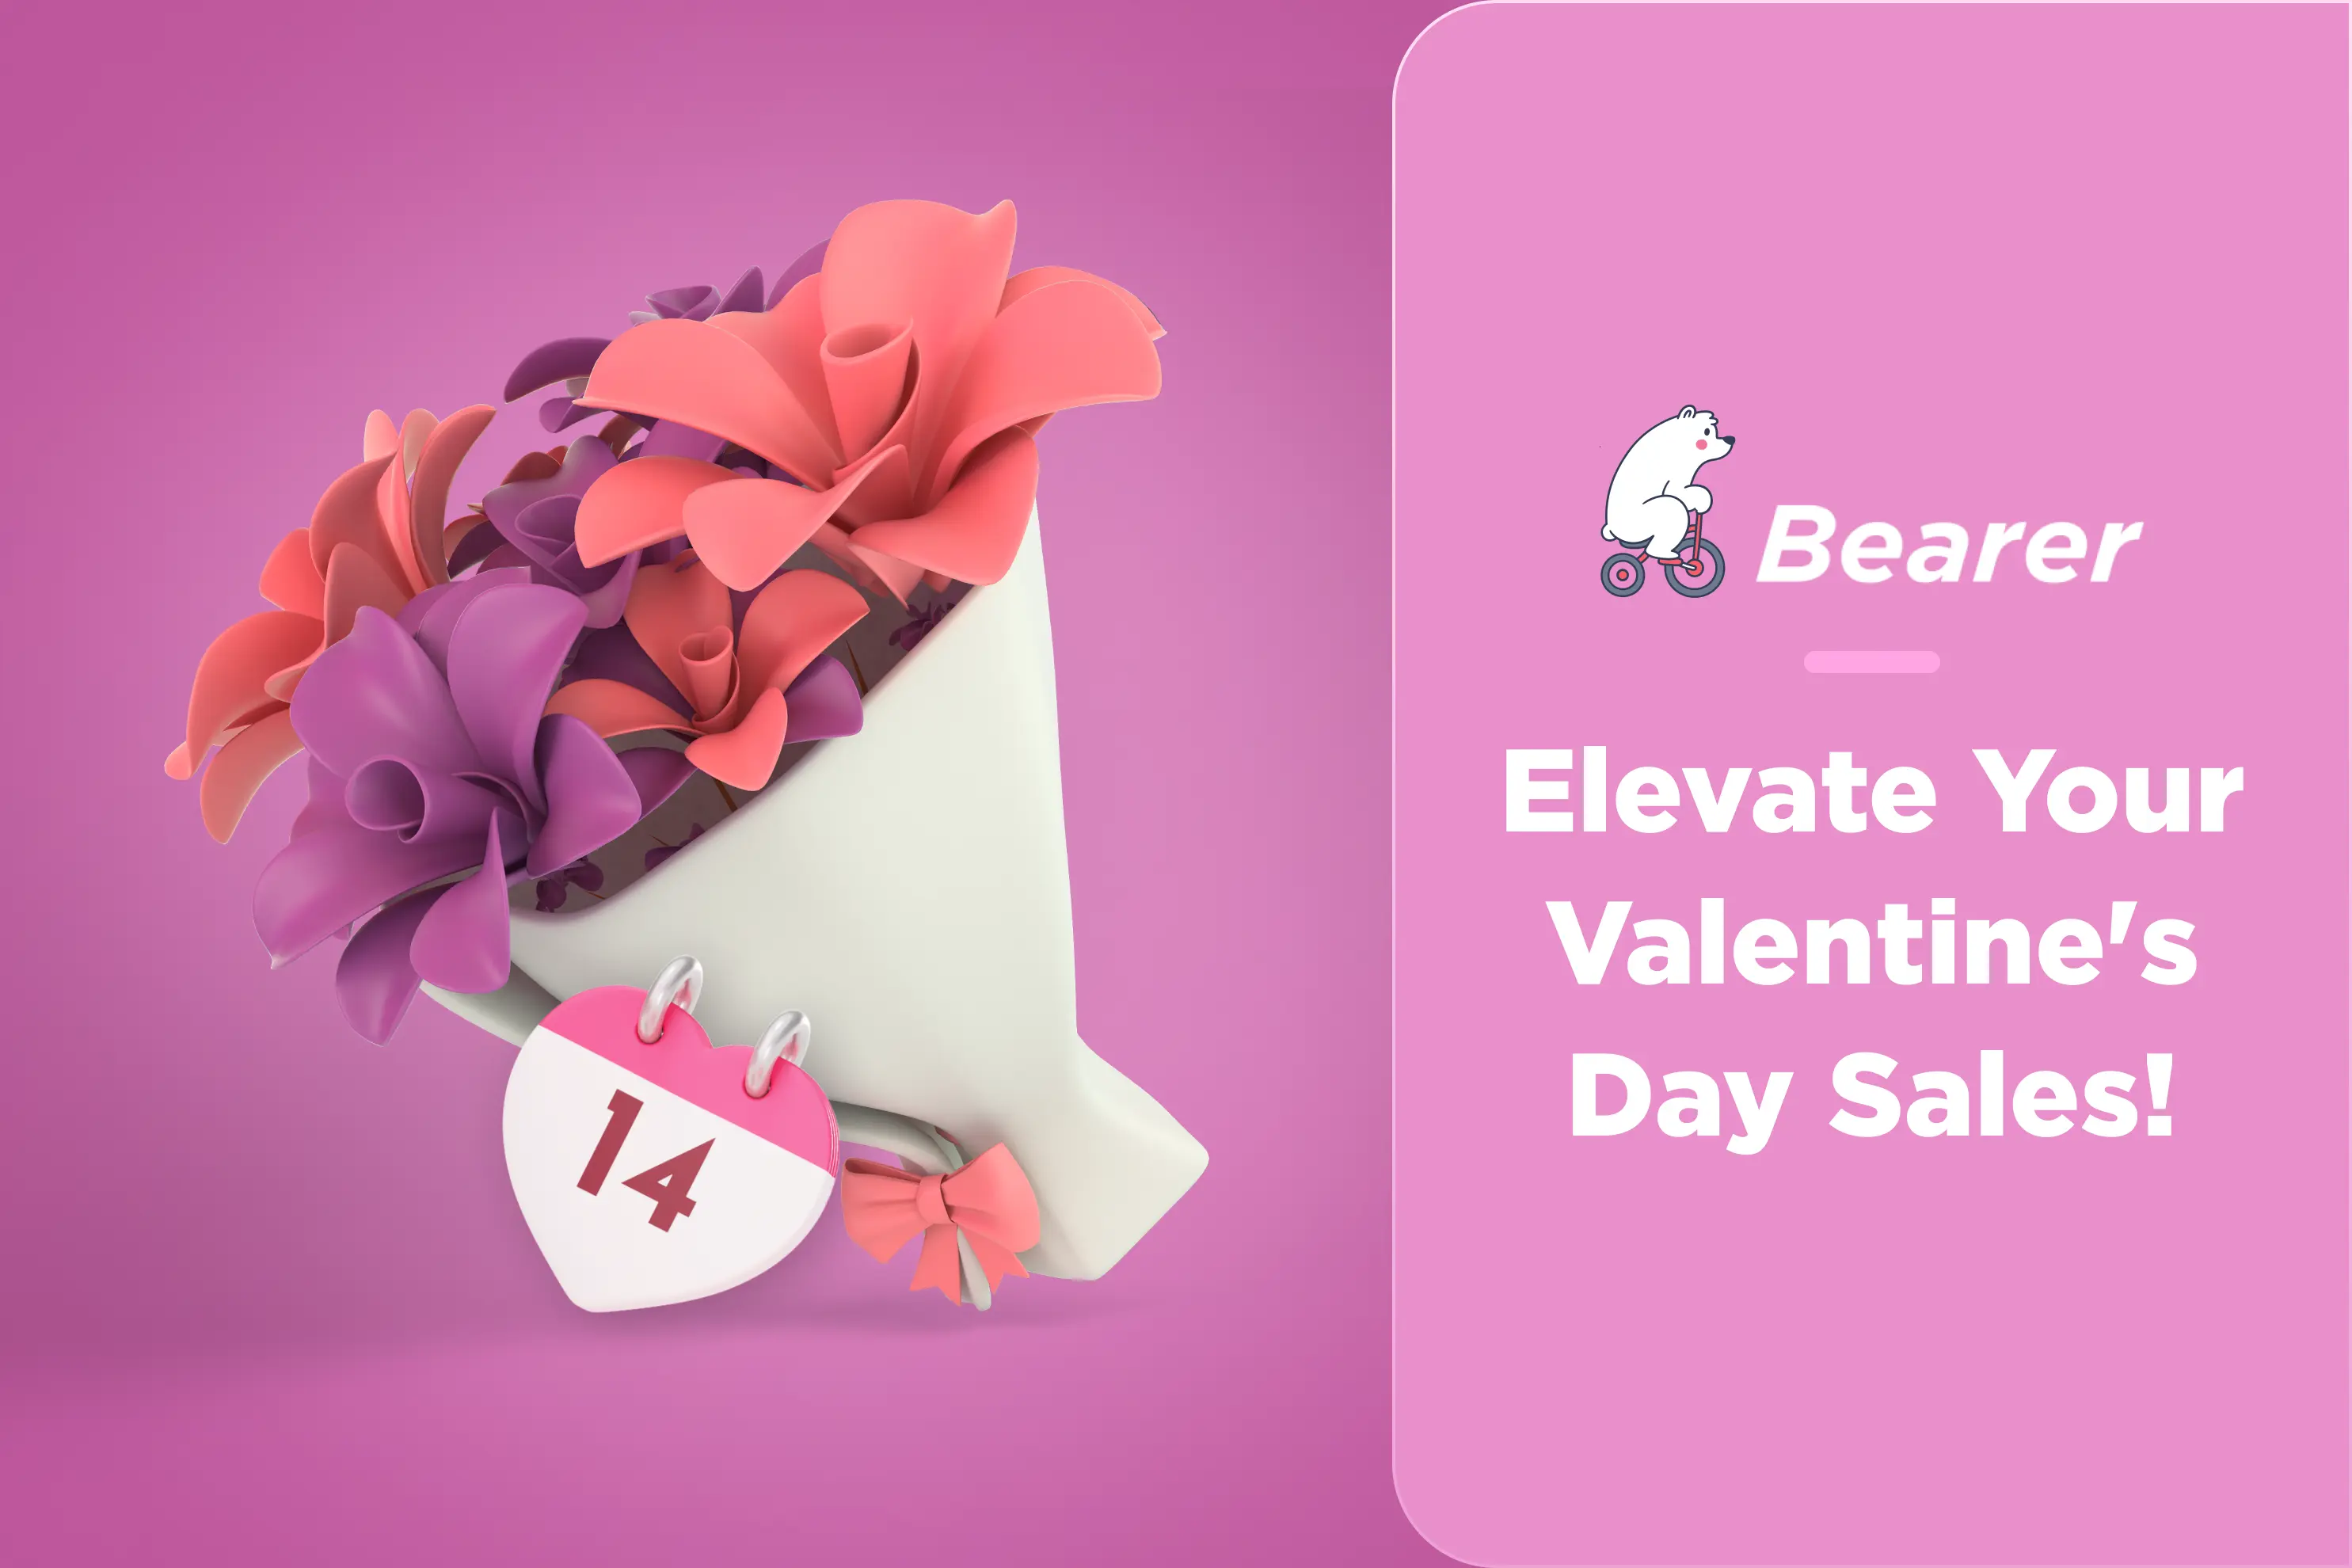 Elevate Your Valentine's Day Sales with Bearer's Express Flower Delivery